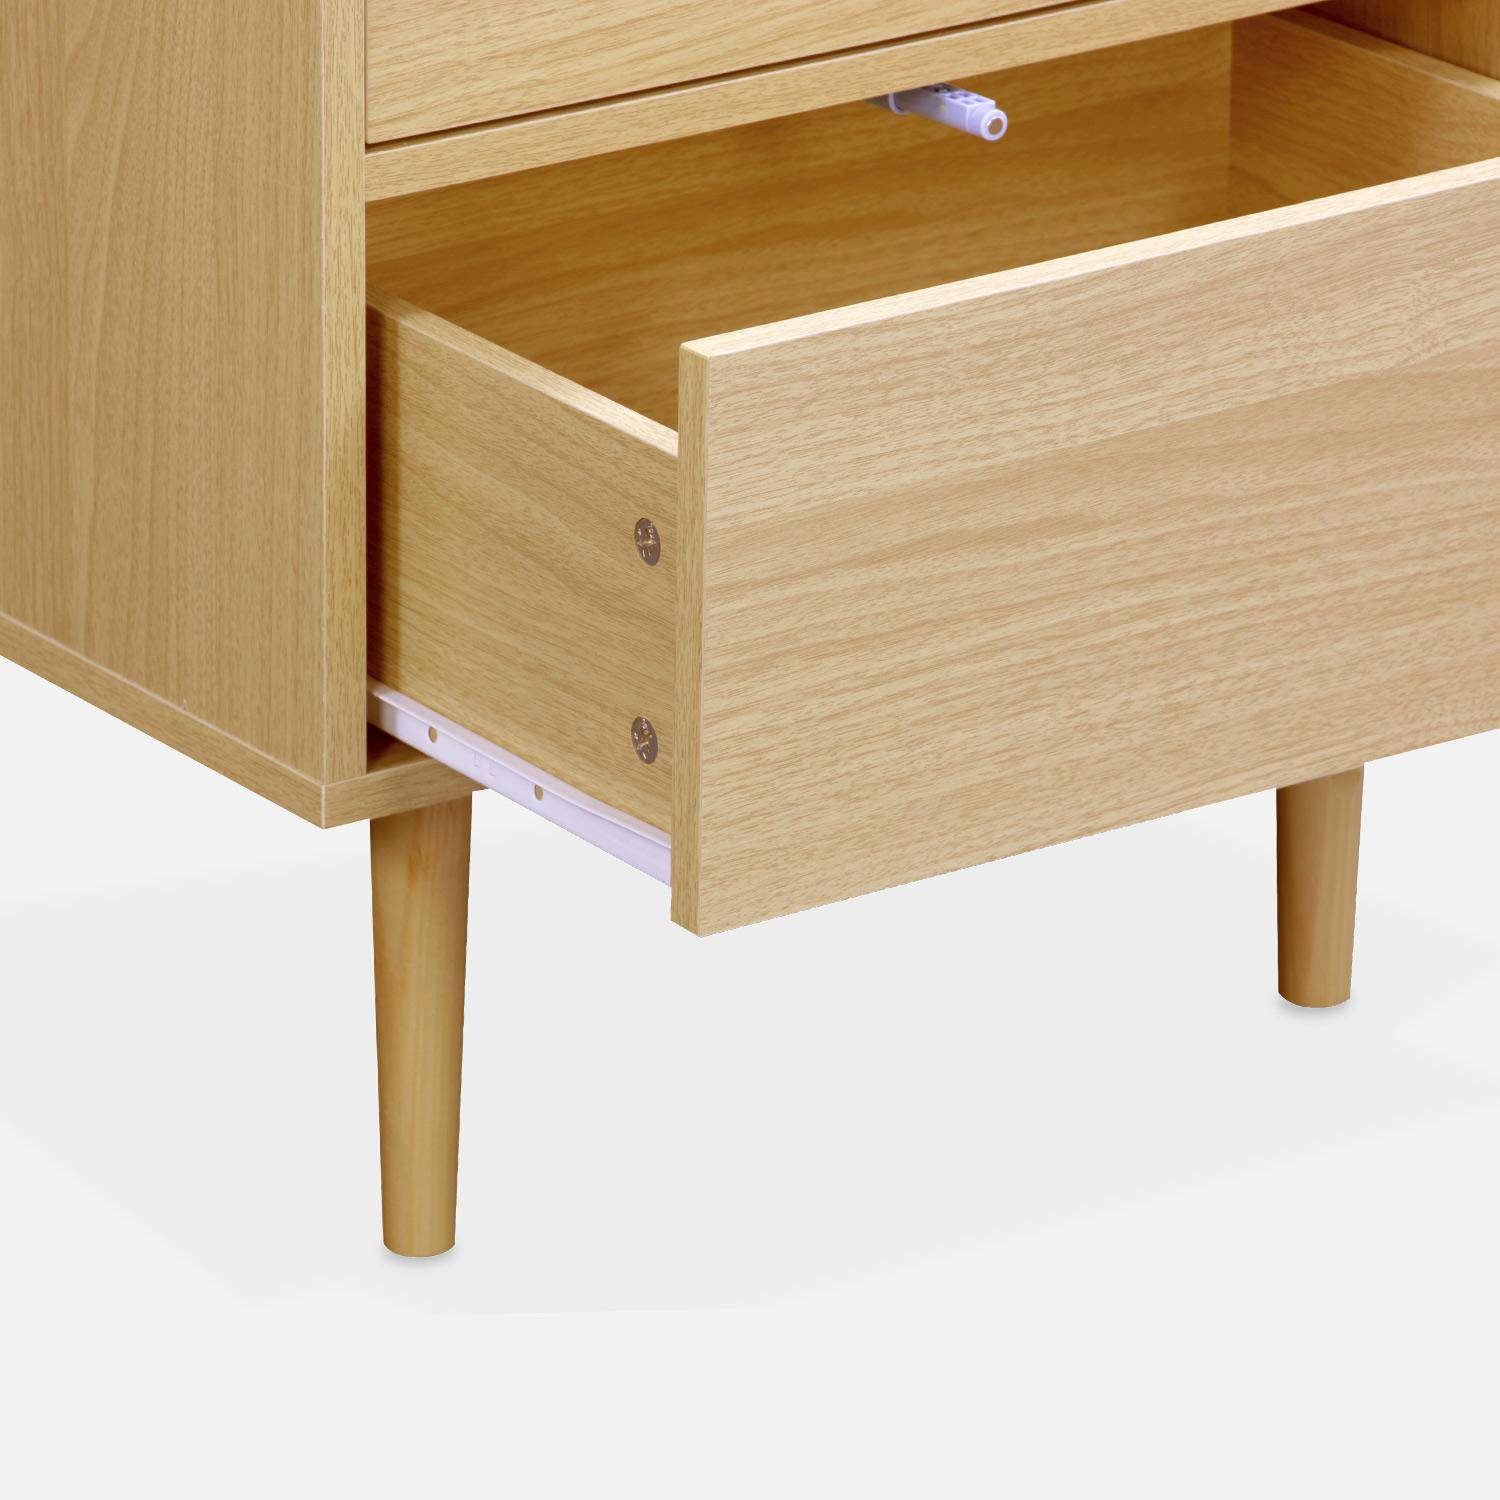 Pair of wood-effect bedside tables with two drawers, 48x40x59cm - Mika - Natural Wood Photo7